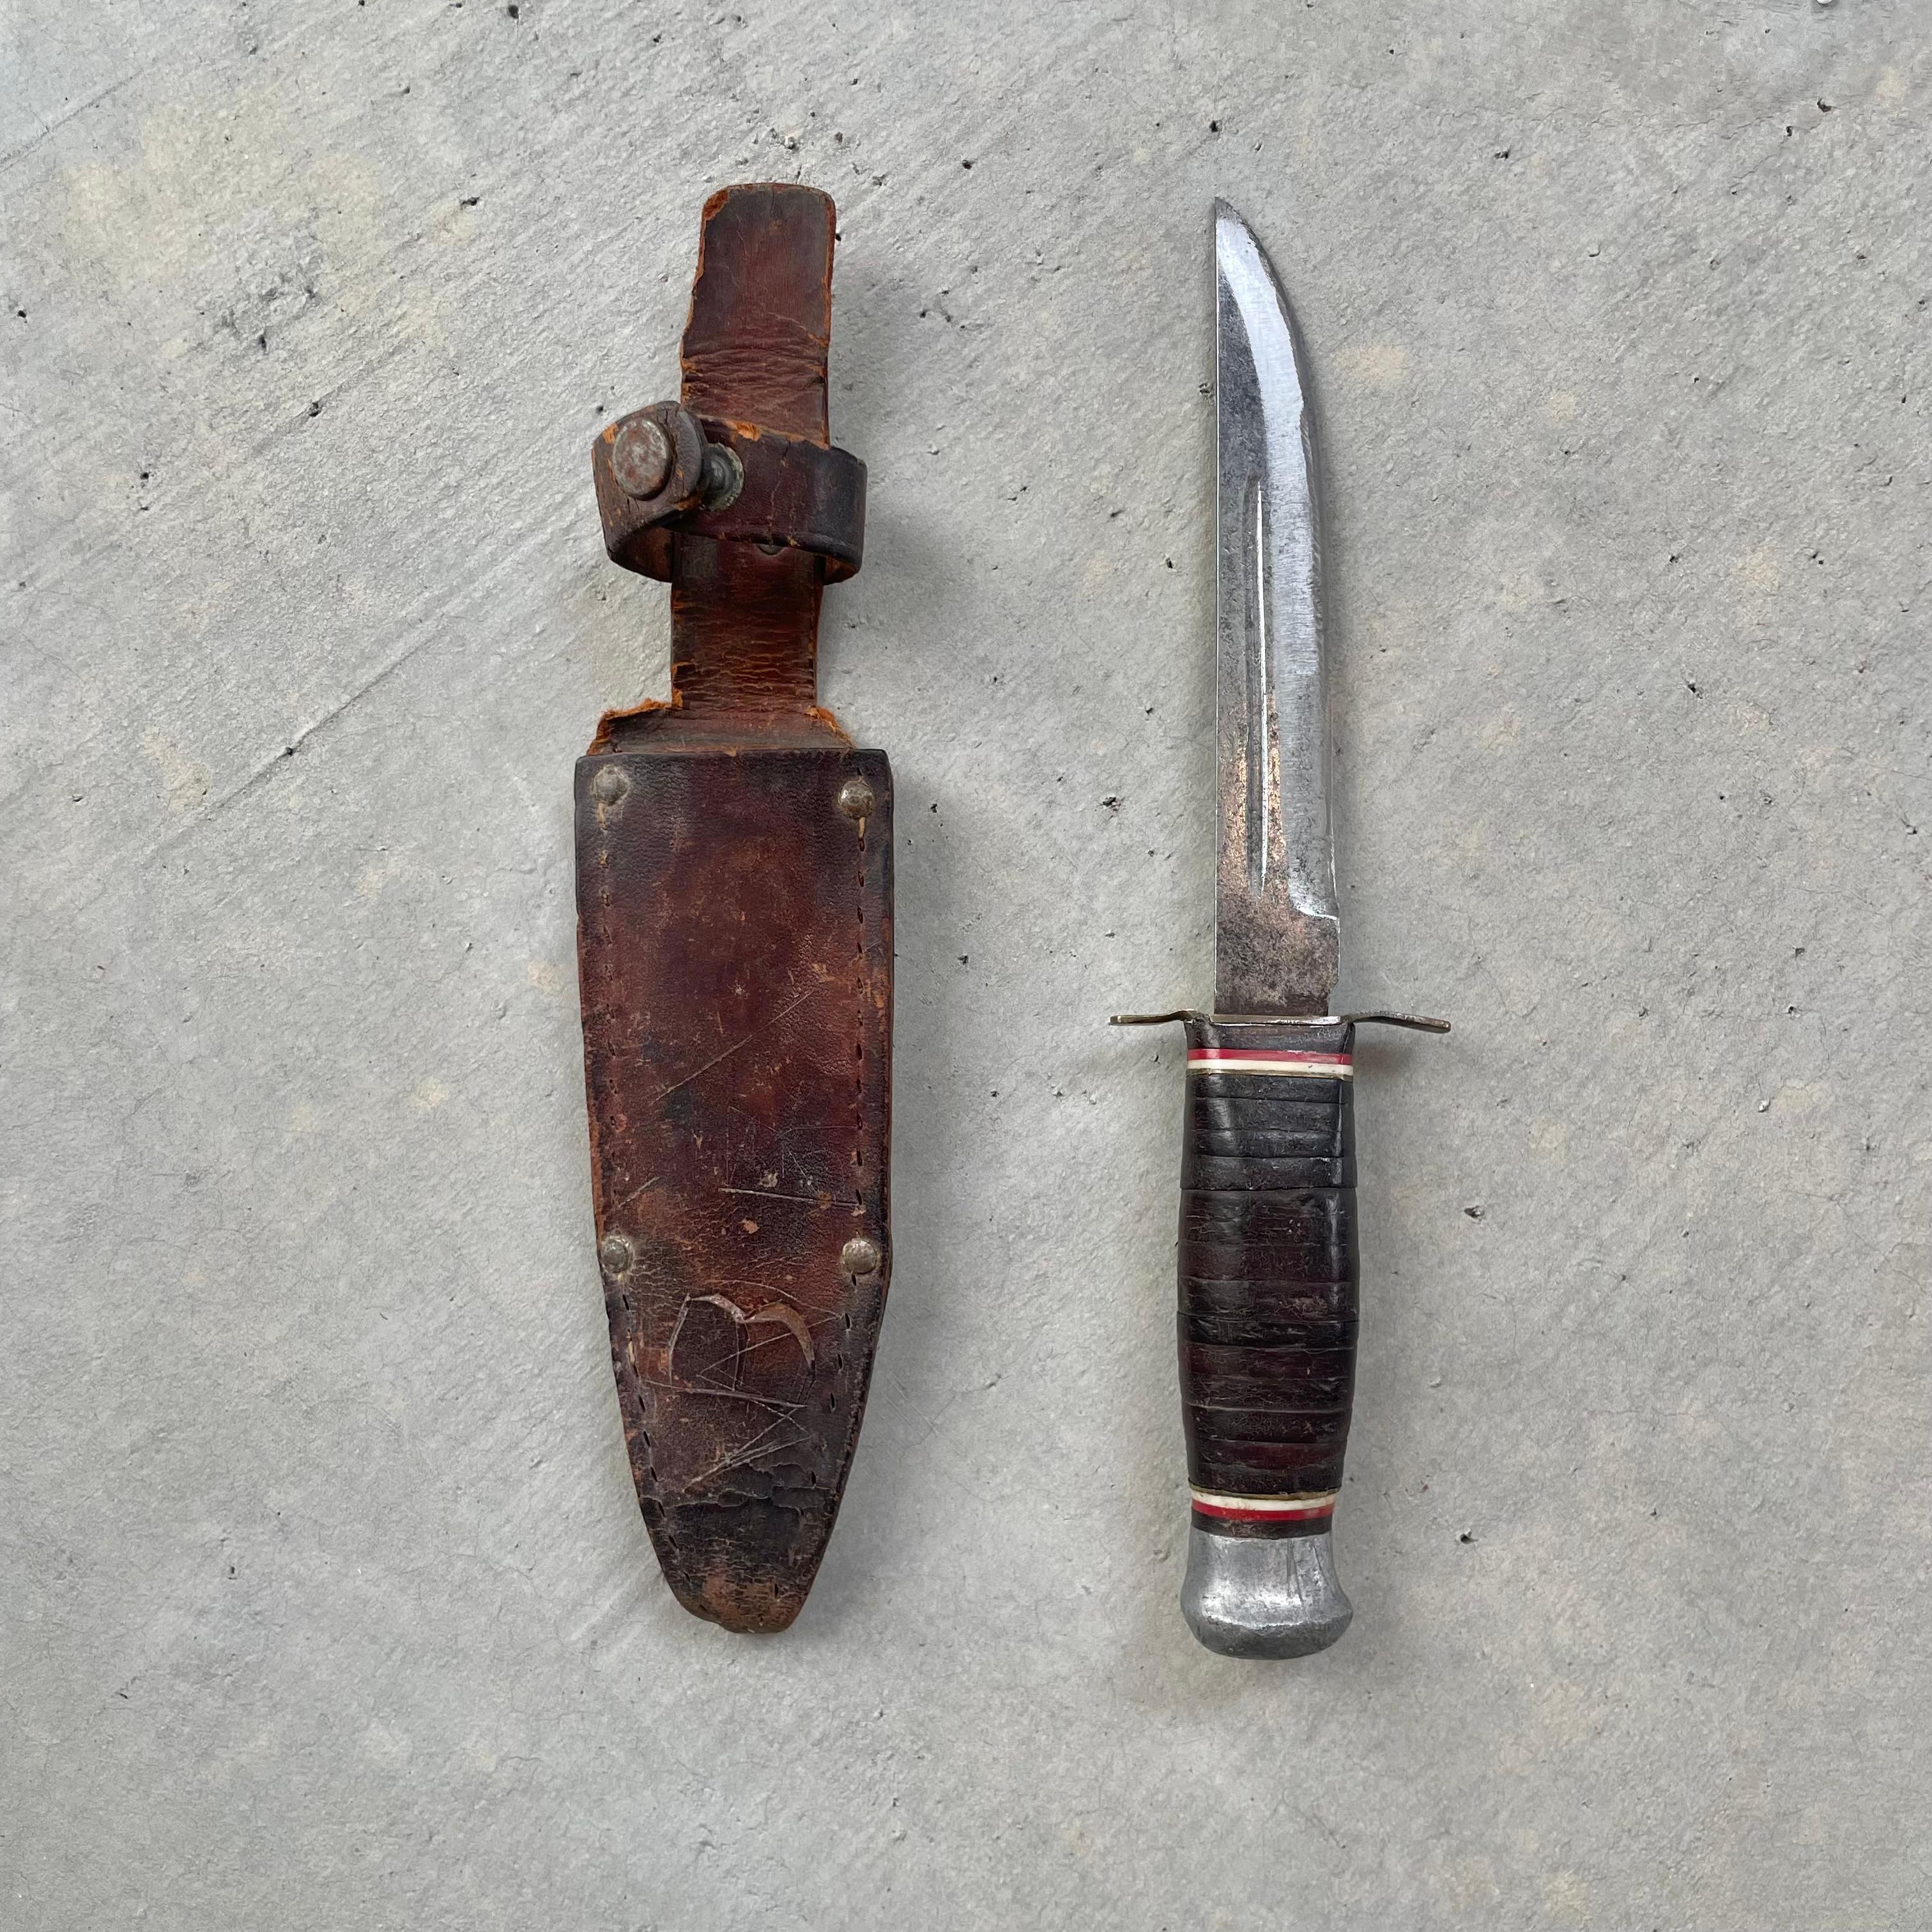 Fantastic Japanese camp knife with a leather sheath. Blade stamped 'Japan.' Traditional stacked leather handle in black with red and white accent rings. Full tang blade running straight through to the pommel. Small metal guard between the blade and